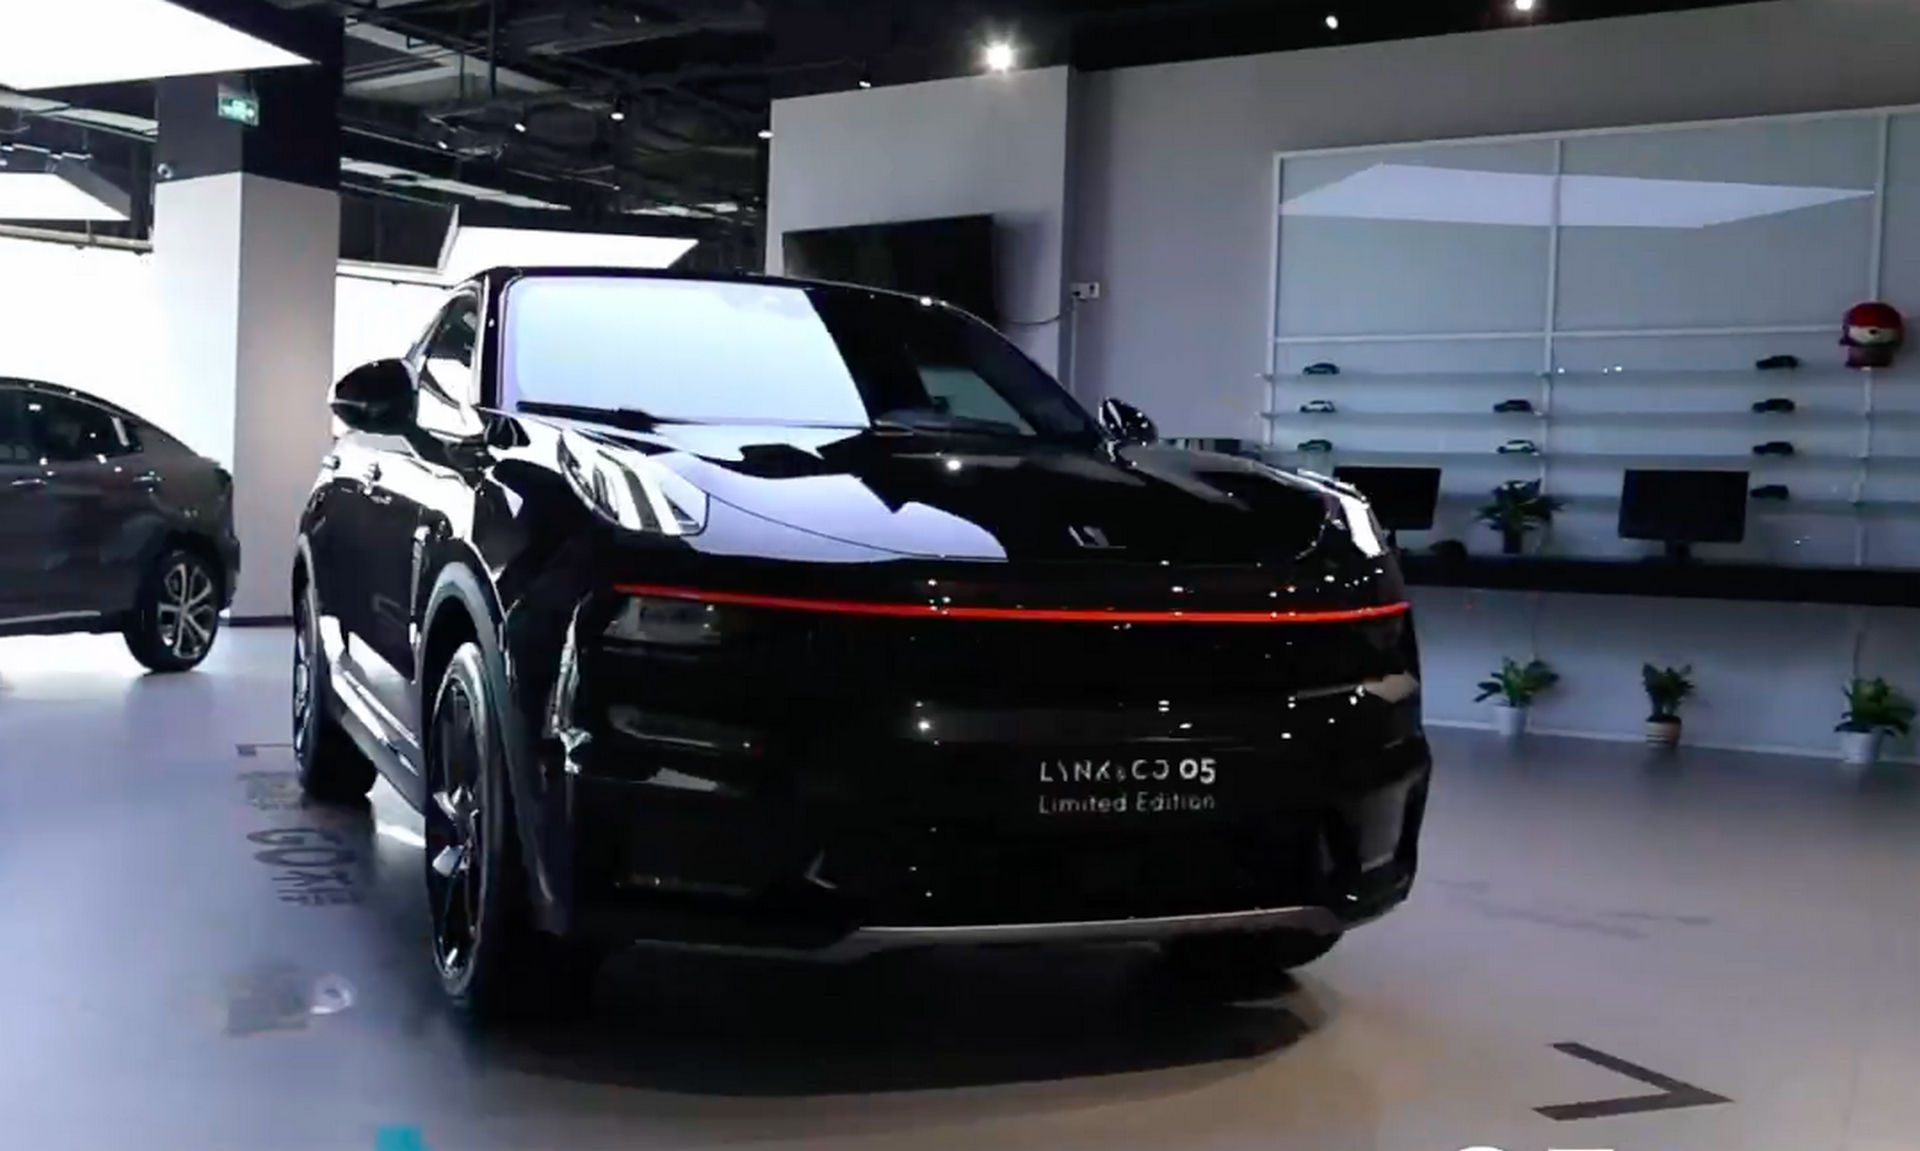 Lynk_Co_05_Limited_Edition_0001